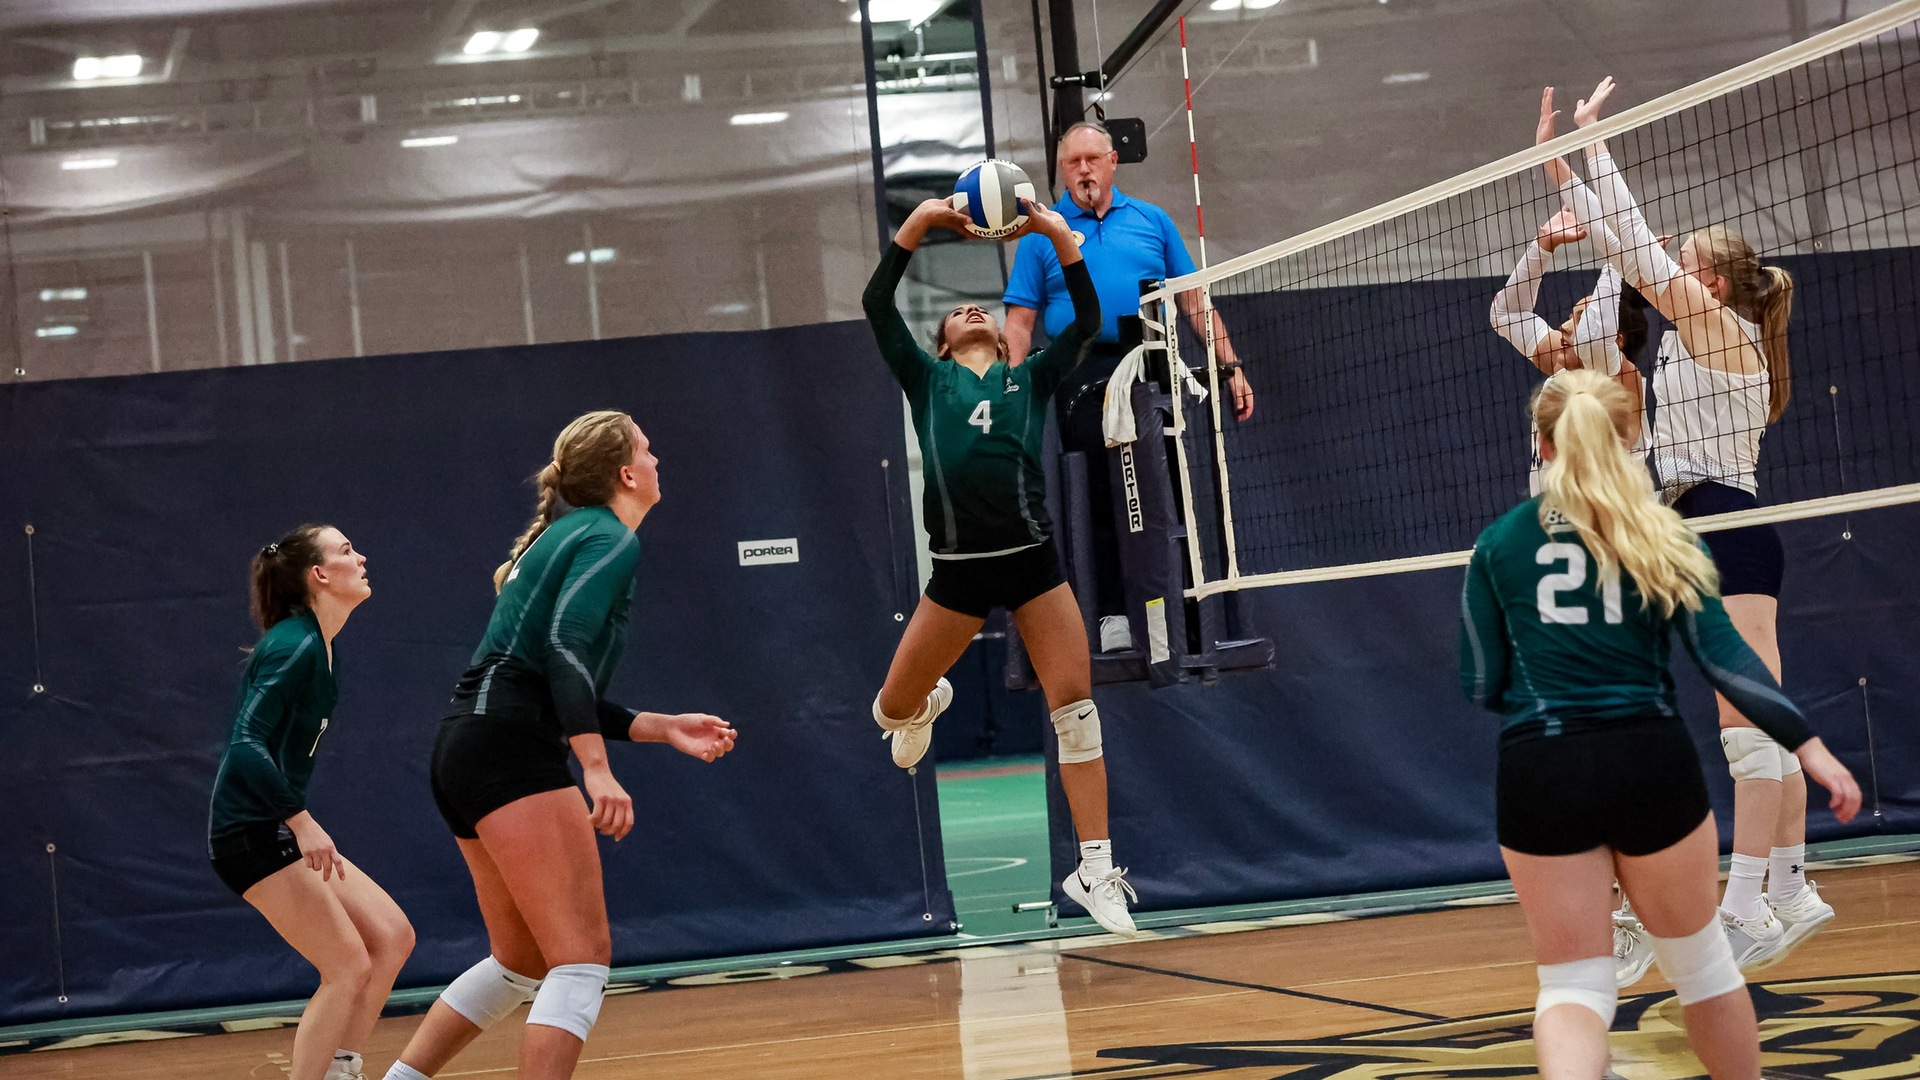 Kaliyah Davis (#4, center) appears to float in mid-air as teammates Alli Cherry (#5, left), Finnley Jacobson (#12, second from left), and McKenna Verhagen (#21, right) look on (Mercedes Rideout photo). Thumbnail